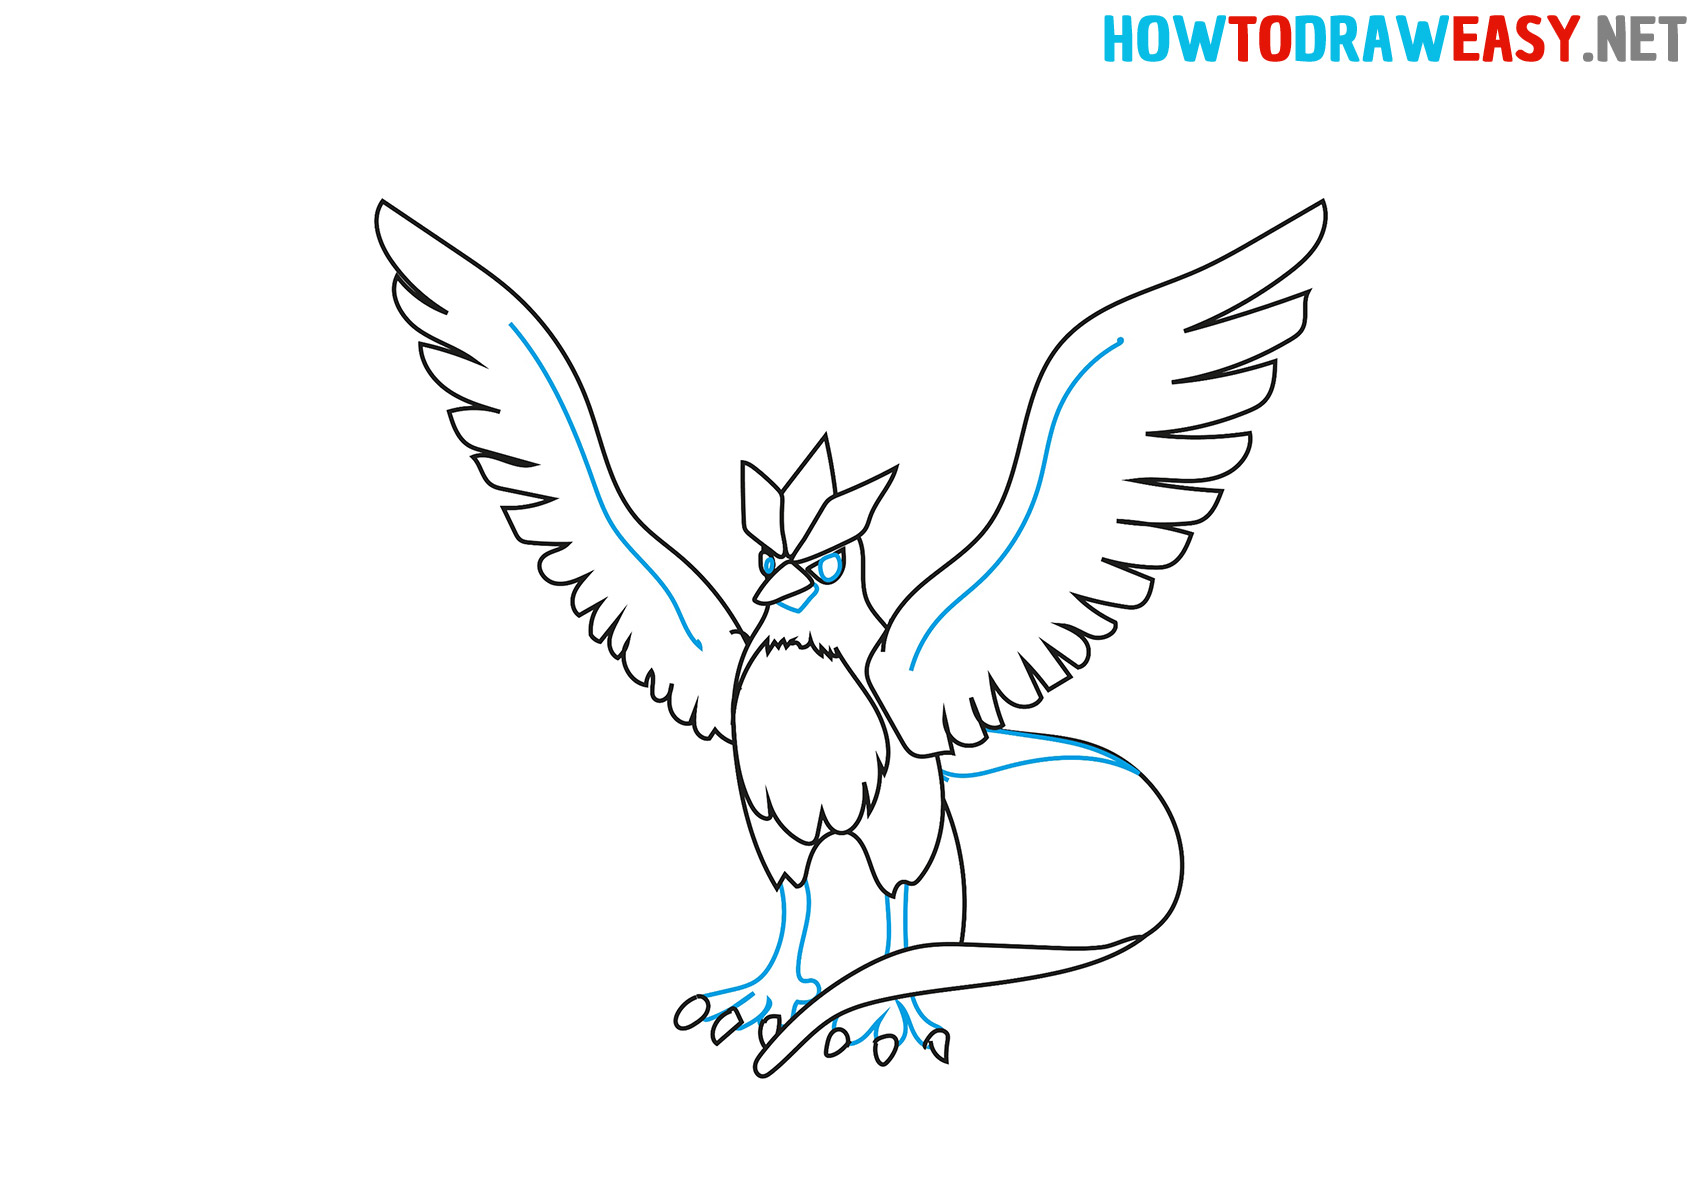 How to Draw an Easy Articuno Pokemon